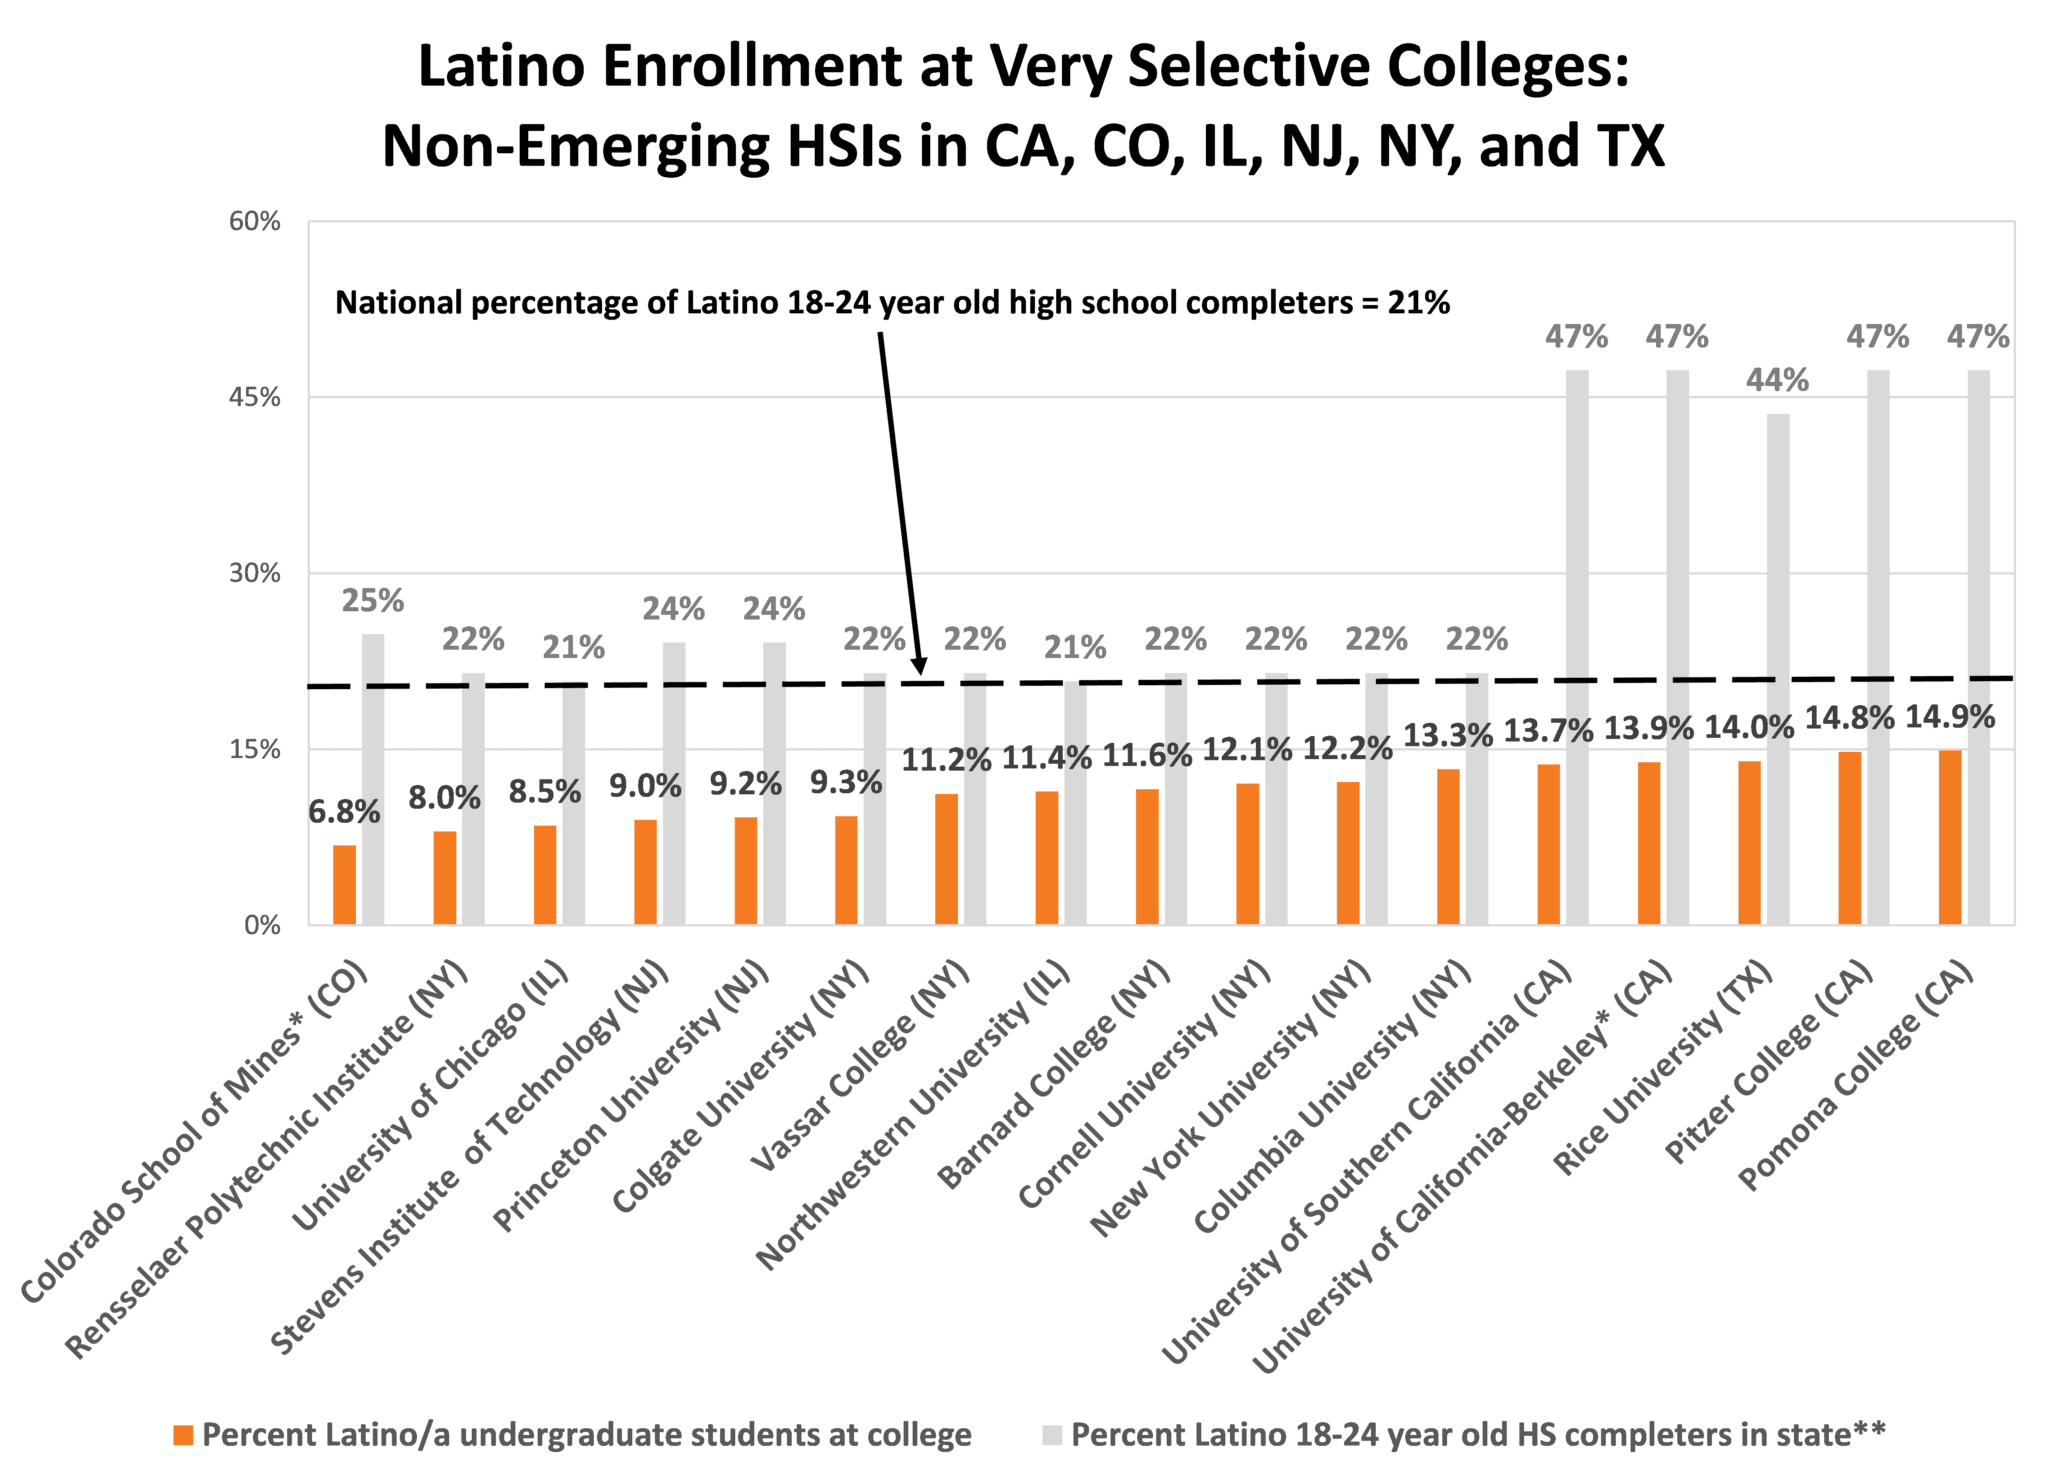 Graph of Latino enrollment at selective colleges